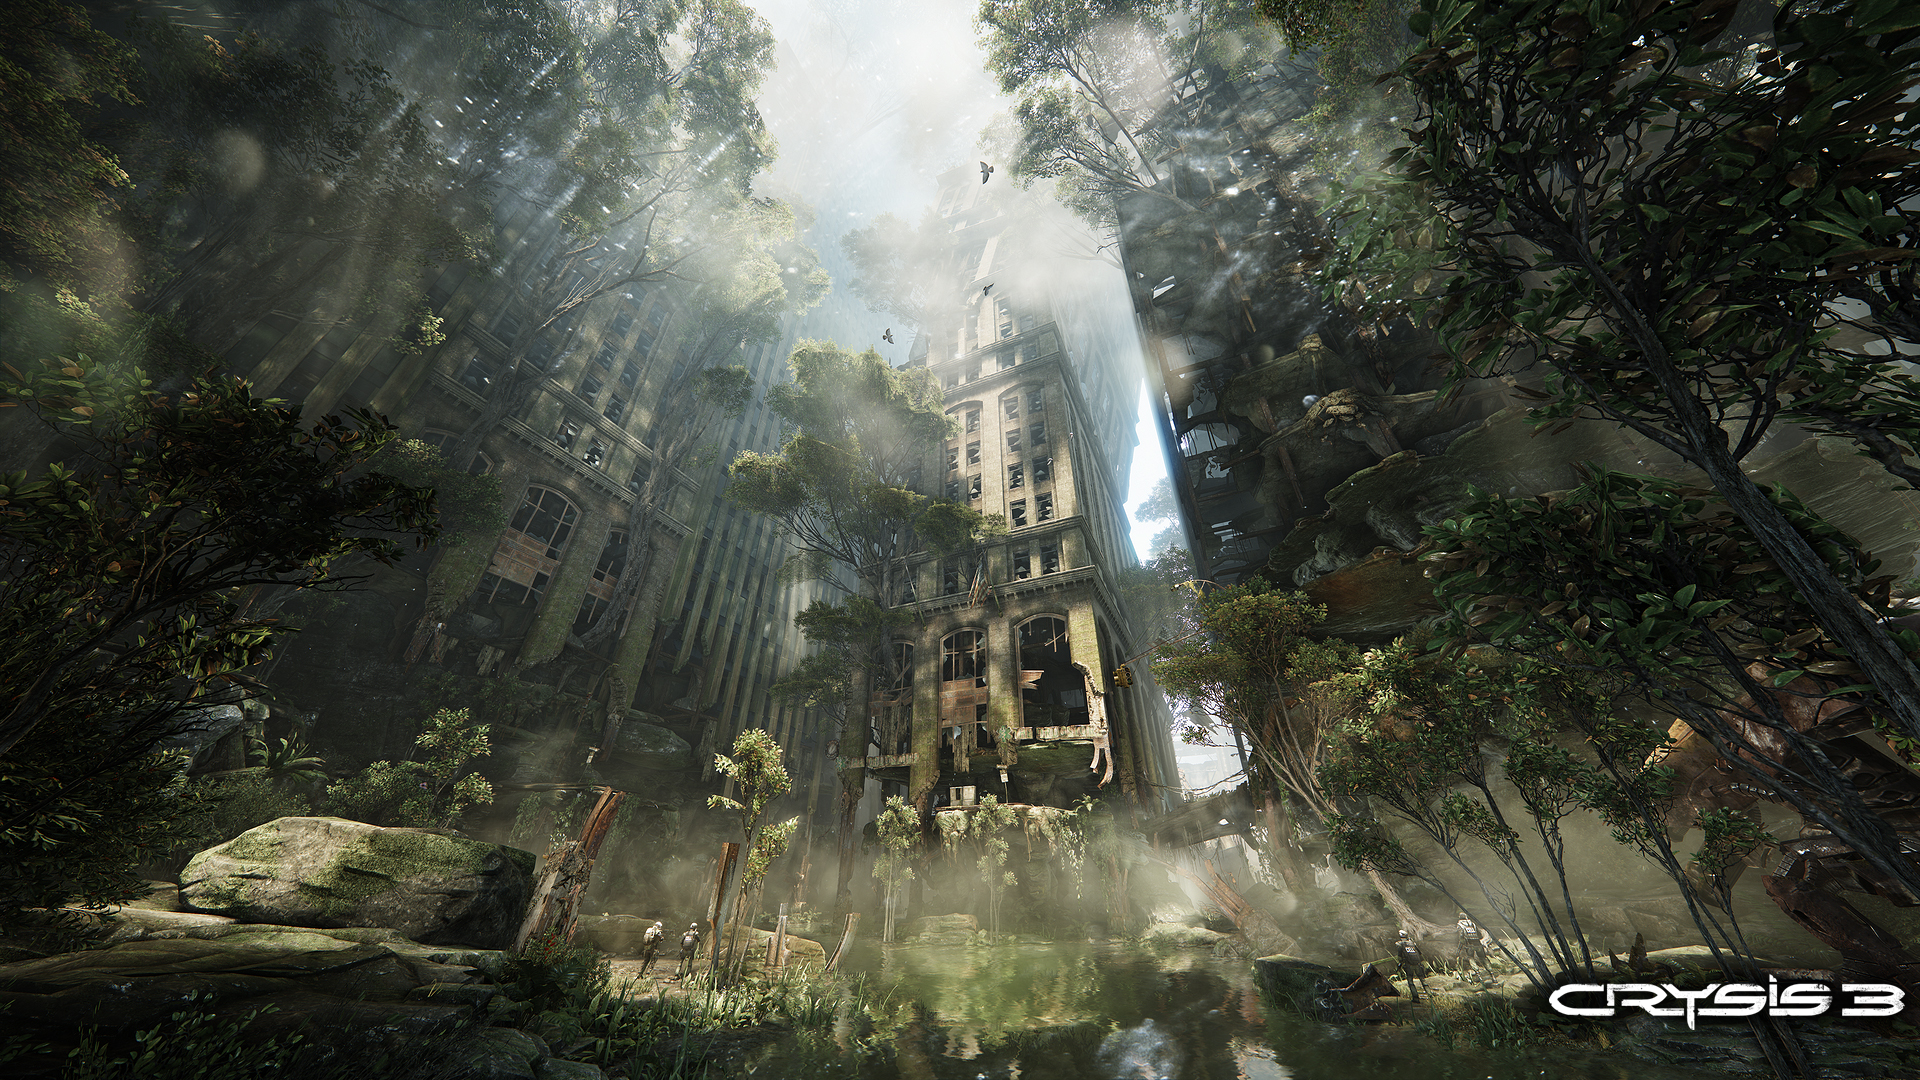 Crysis 3 Interactive Single Player Campaign Trailer Coming This